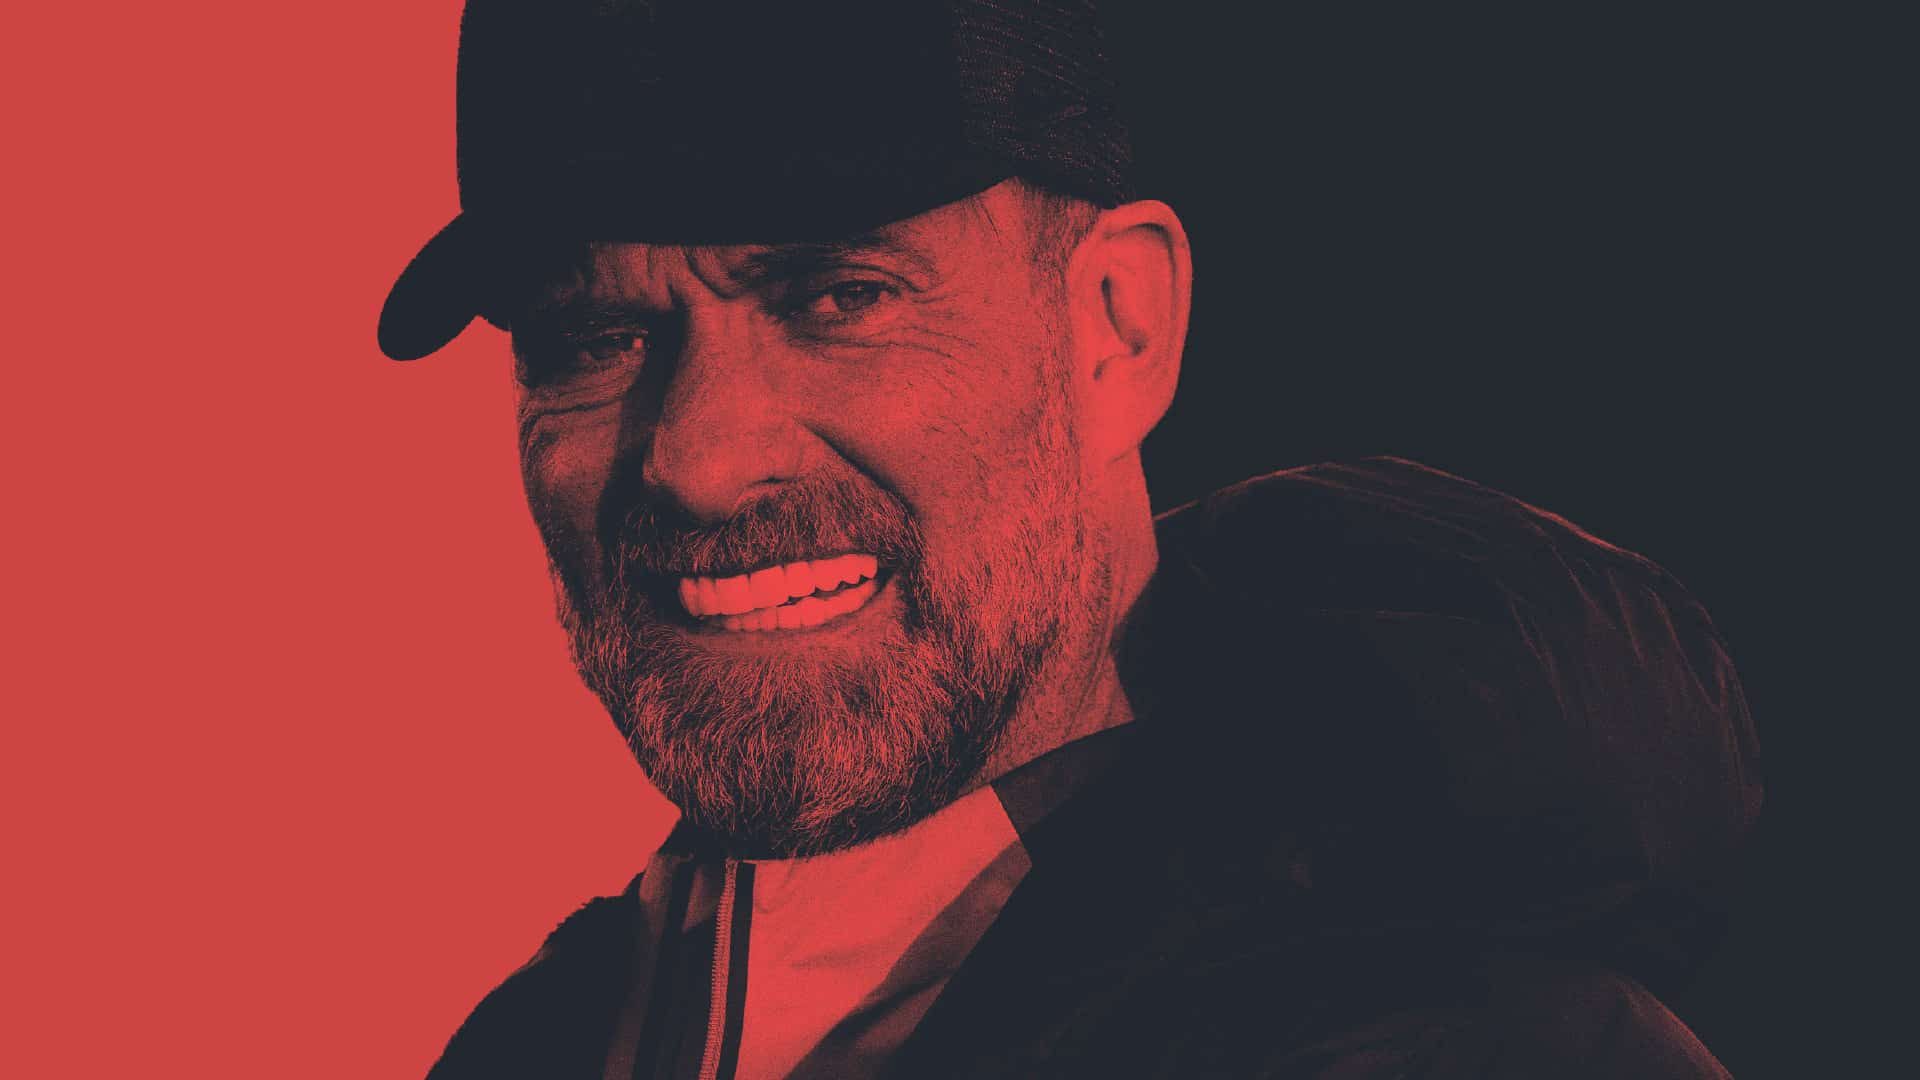 It's an article about VAR, so it's a picture of Jurgen Klopp, teeth clenched, with a red tint